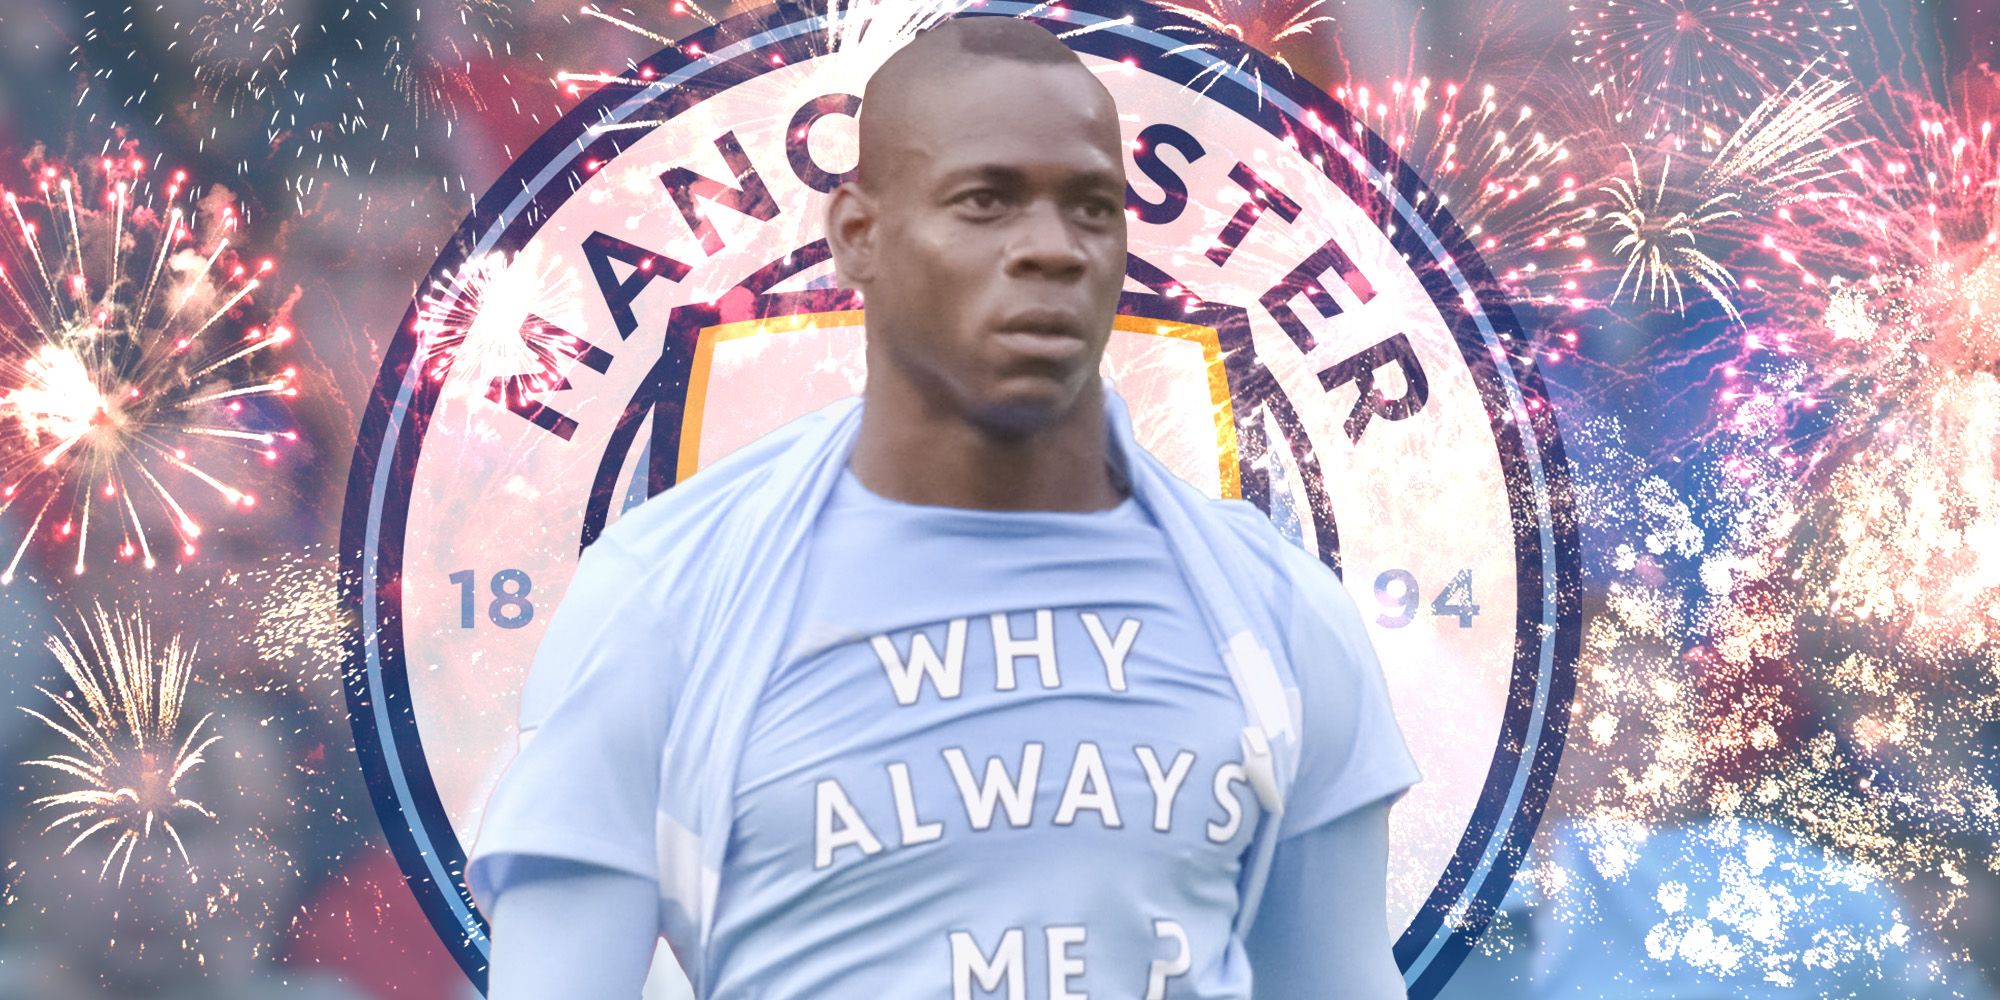 Mario Balotelli and his 'Why Always Me' shirt with some fireworks and a Man City badge